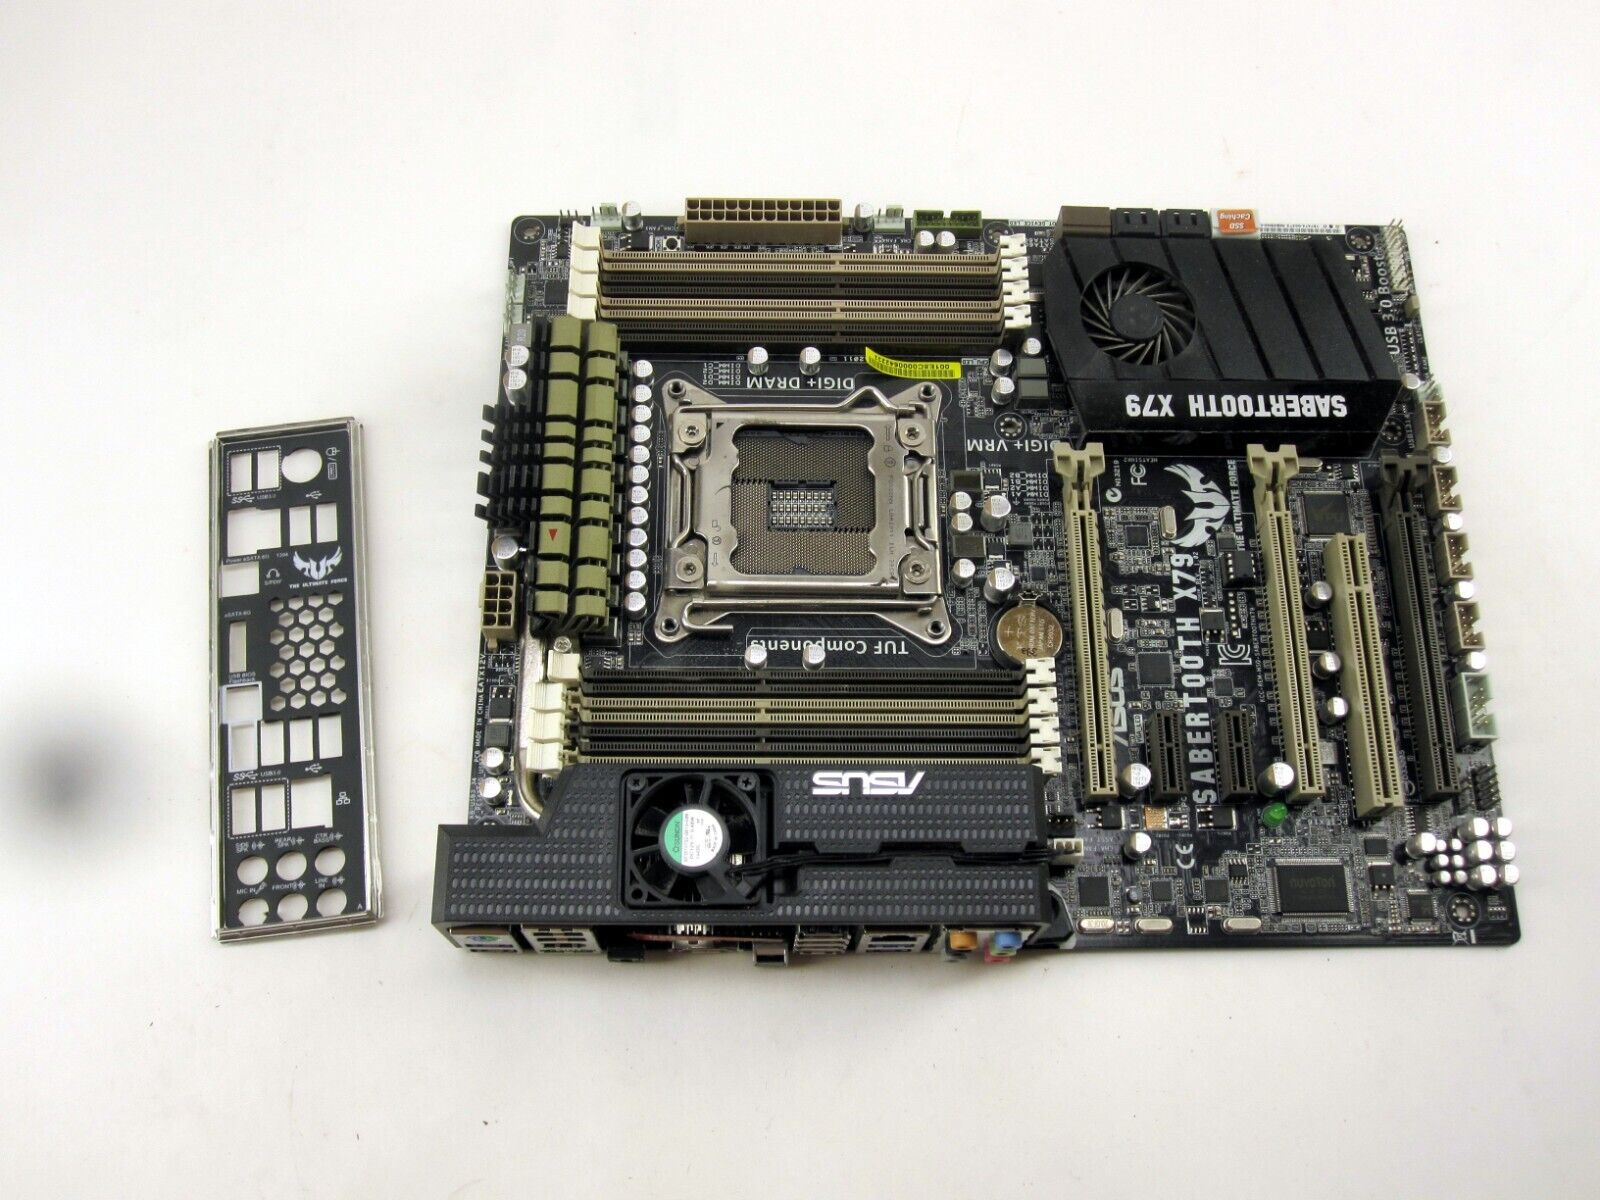 Asus Sabertooth X79 Motherboard with I/O Shield